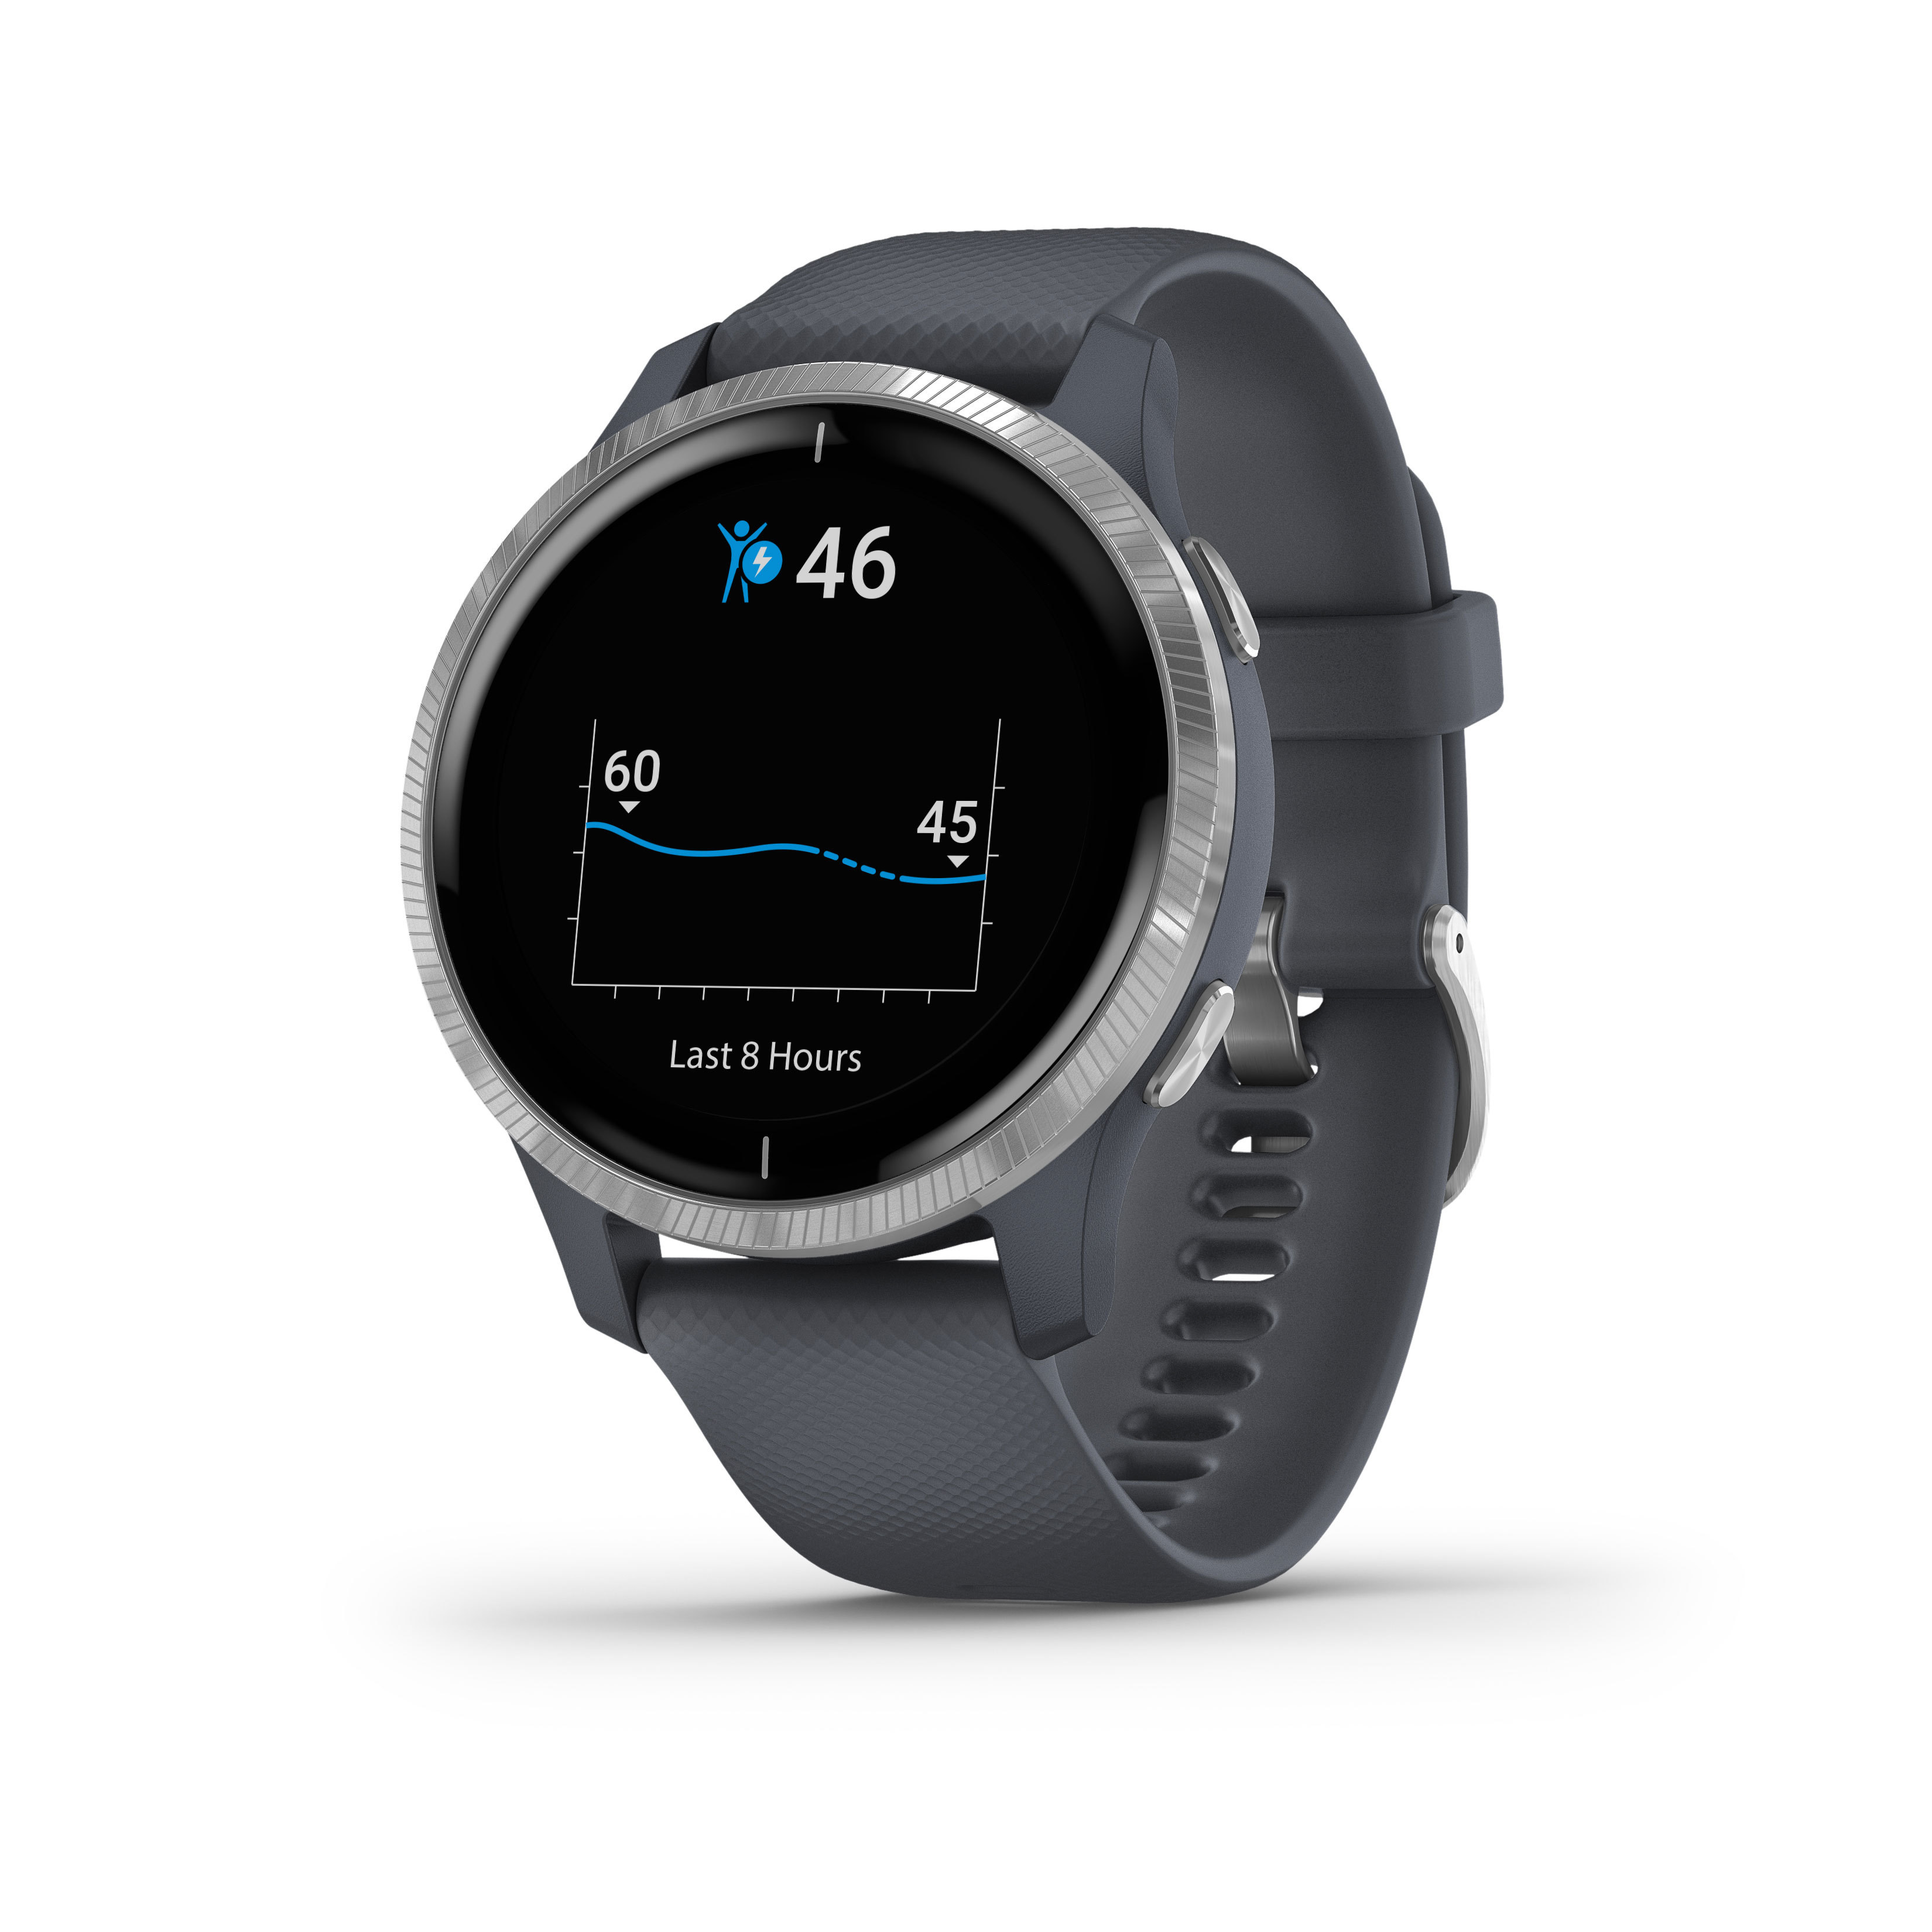 Introducing Garmin® vívoactive® 4 and 4S GPS smartwatches with enhanced  health monitoring and new animated on-screen workouts - Garmin Newsroom